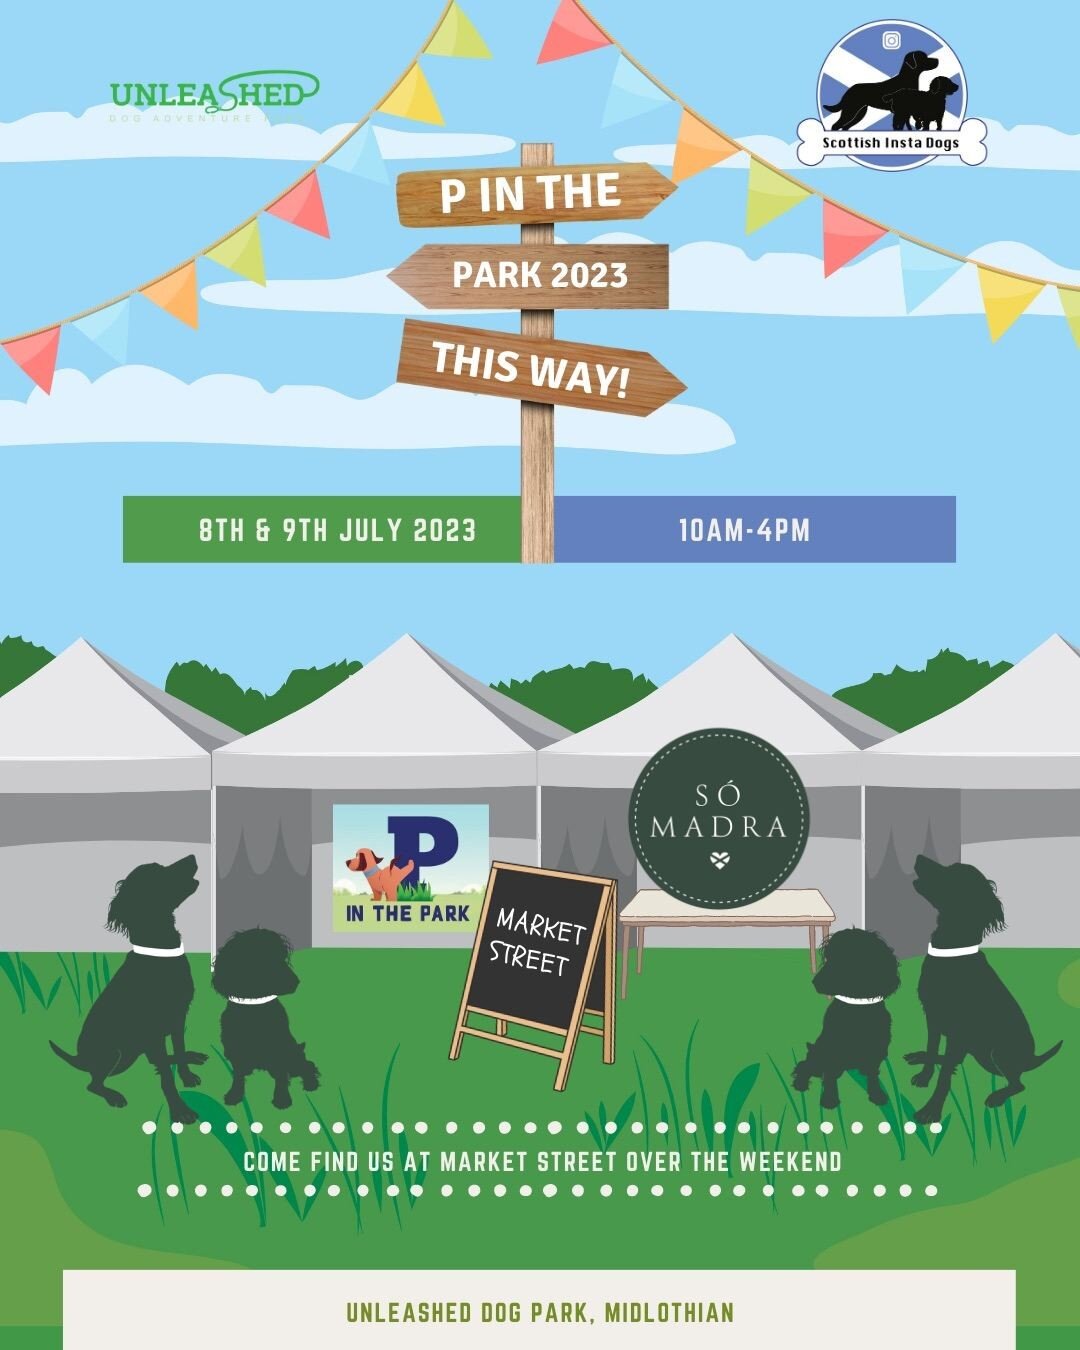 We will be back at P in the Park again this year on 8 and 9 July! 🐶

Its going to be bigger and better than ever so don't forget to buy your ticket 🤩🐾

Can't wait to see you all at this fab event! 😍

#scottishinstadogs #scottishdogs #dogsofscotla